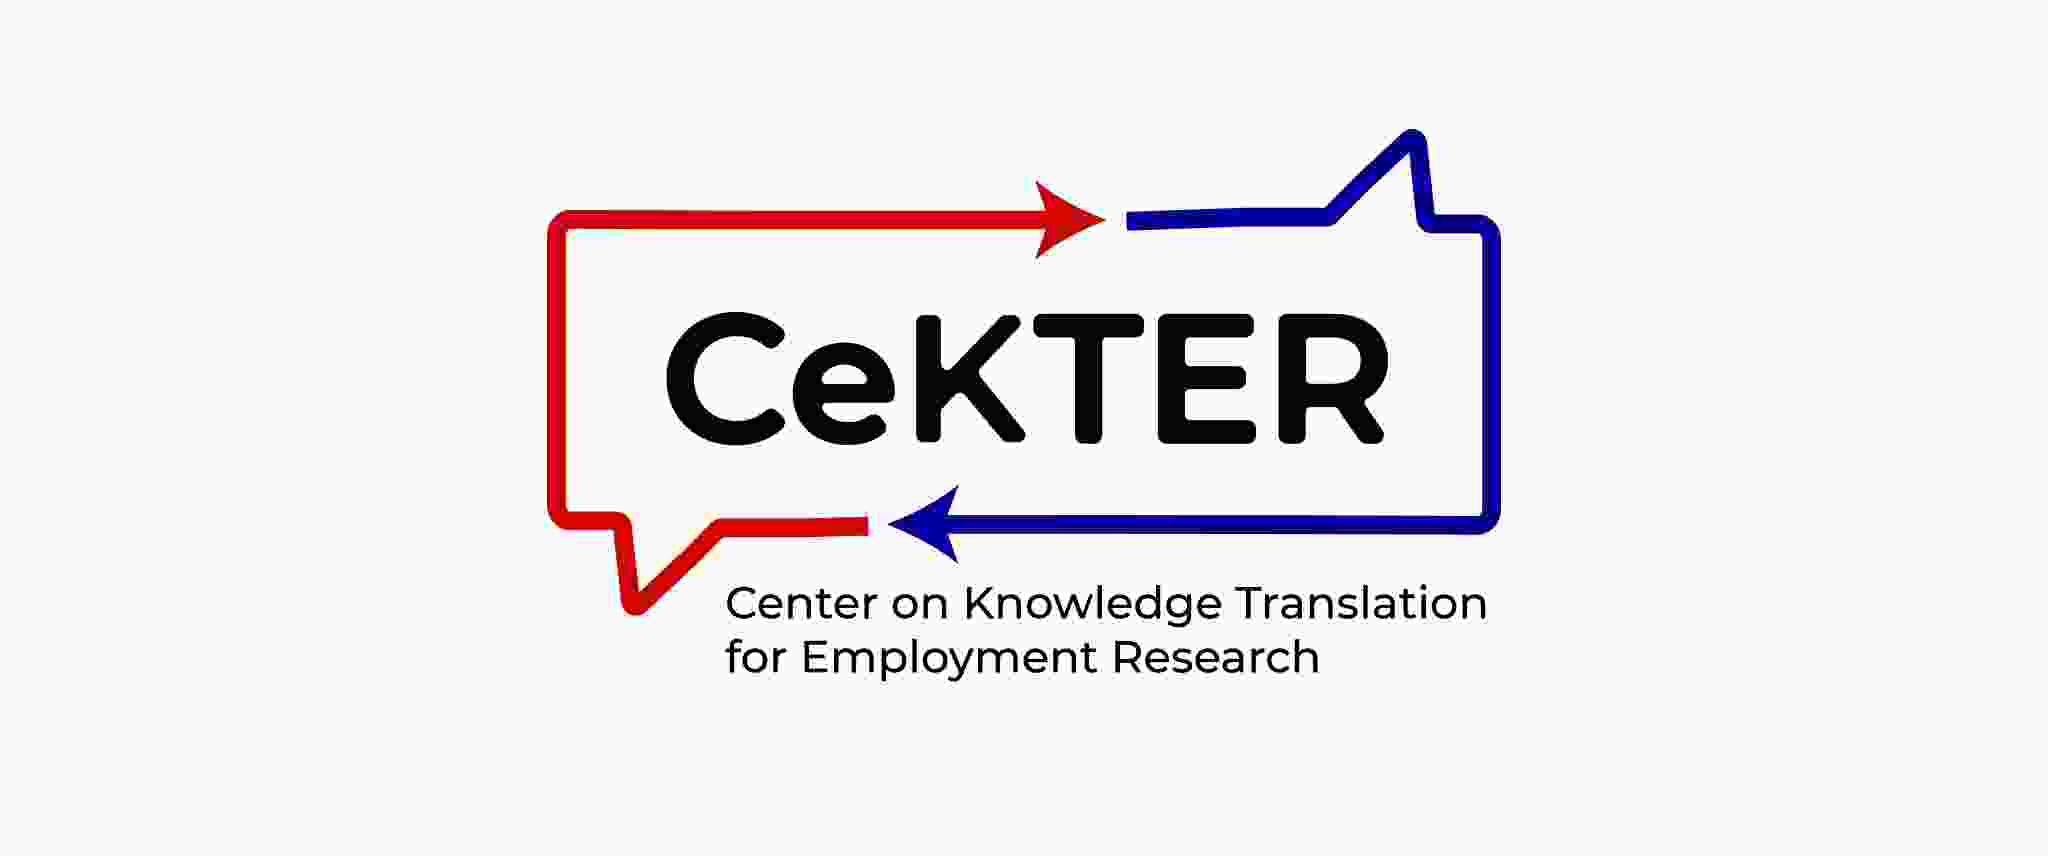 Center on Knowledge Translation for Employment Research